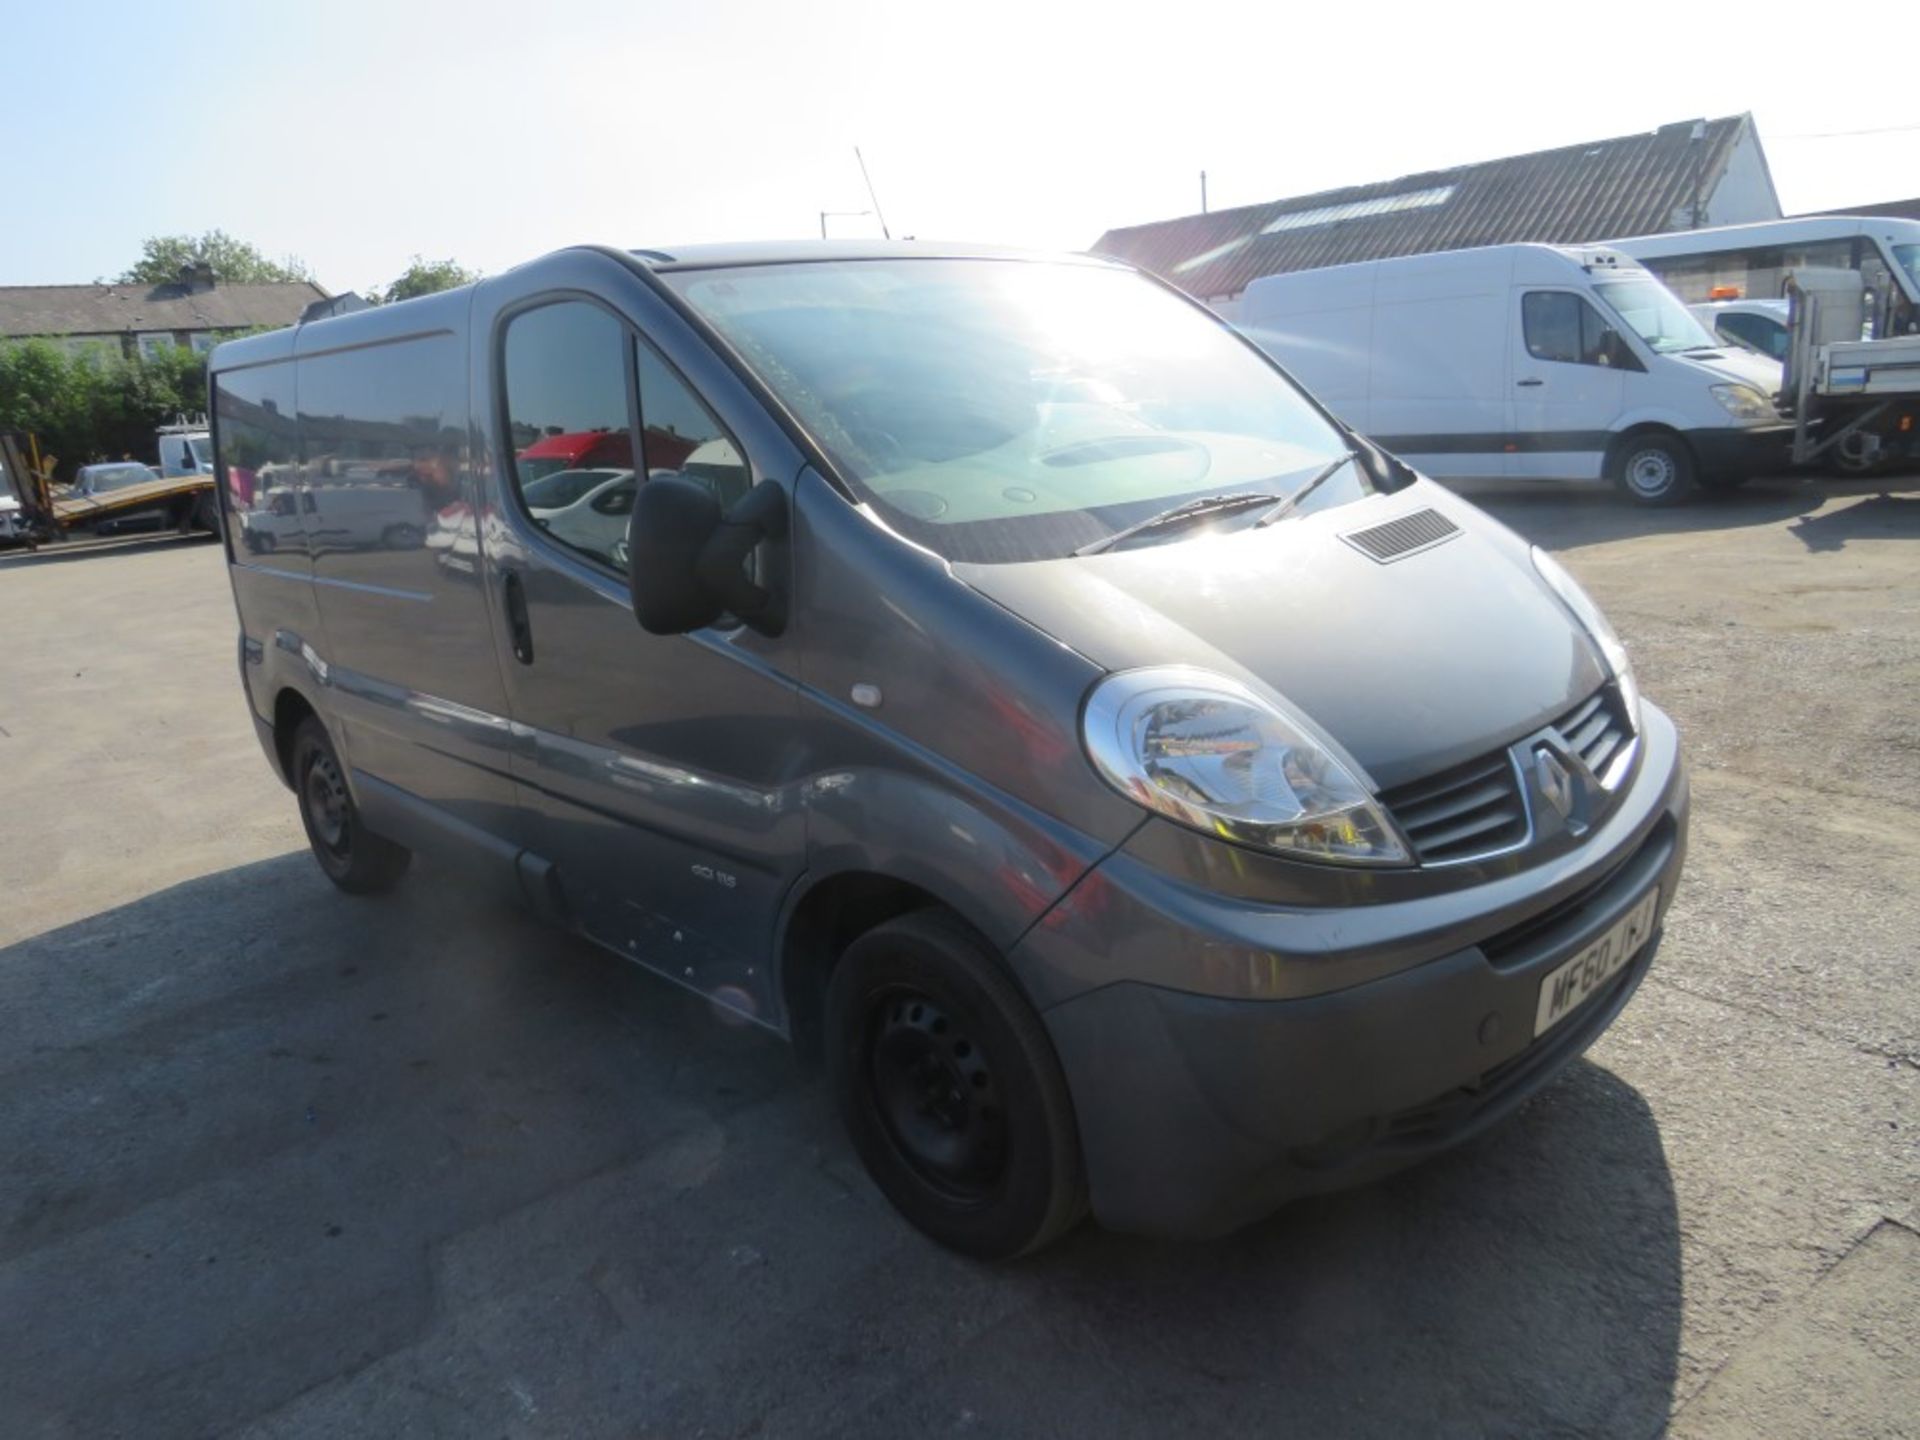 60 reg RENAULT TRAFIC SL27 DCI 115, 1ST REG 09/10, 180327M NOT WARRANTED, V5 HERE, 1 OWNER FROM